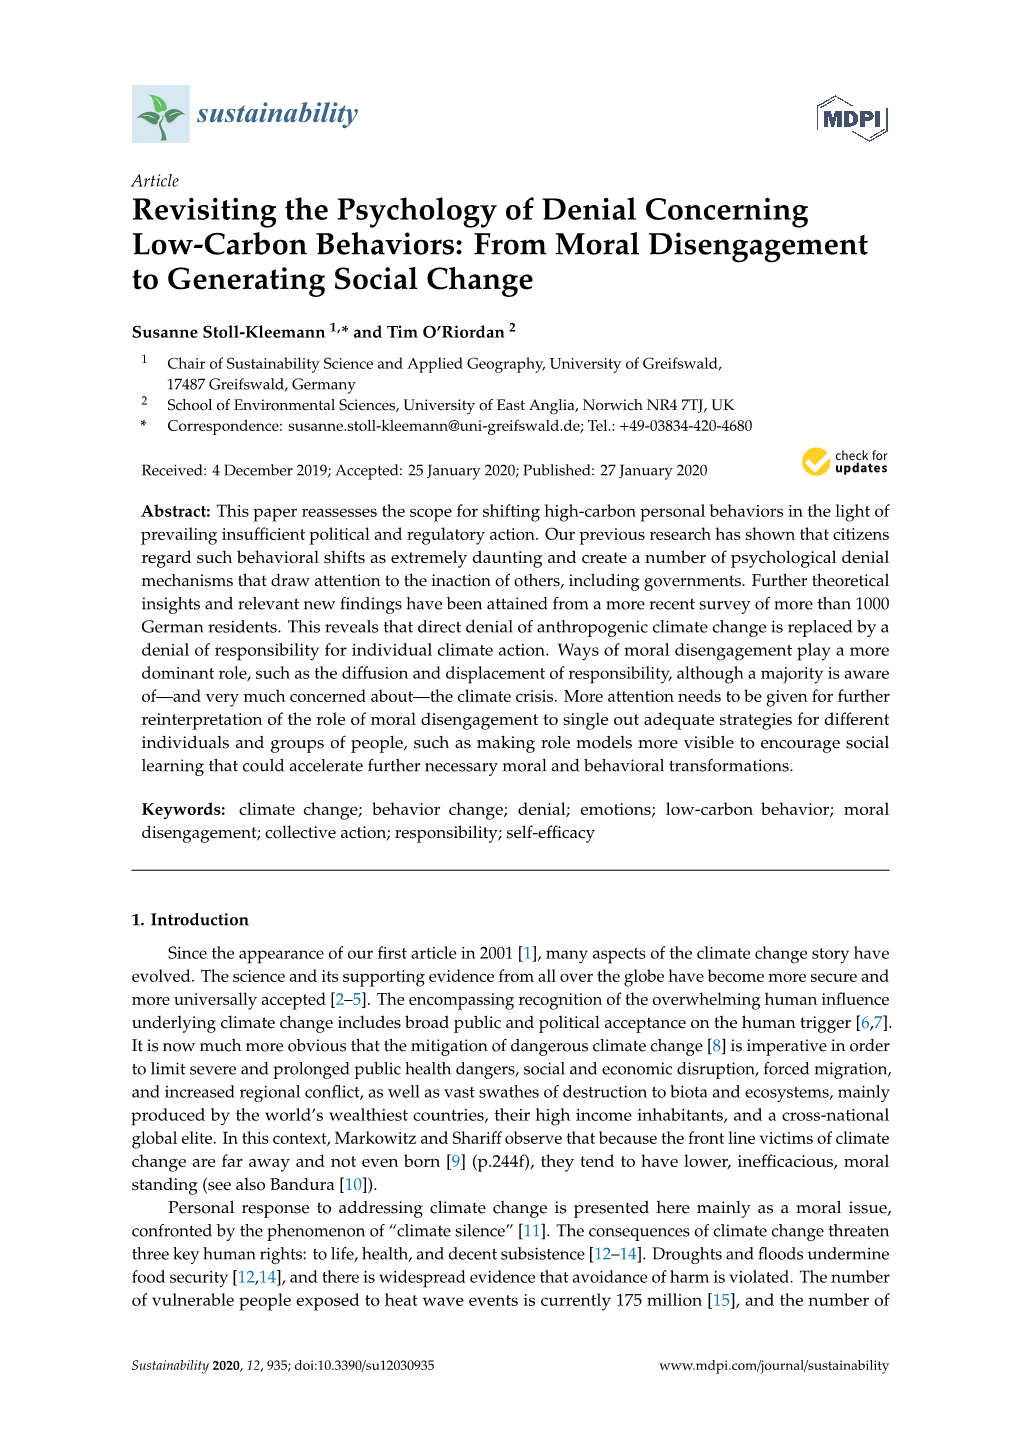 Revisiting the Psychology of Denial Concerning Low-Carbon Behaviors: from Moral Disengagement to Generating Social Change